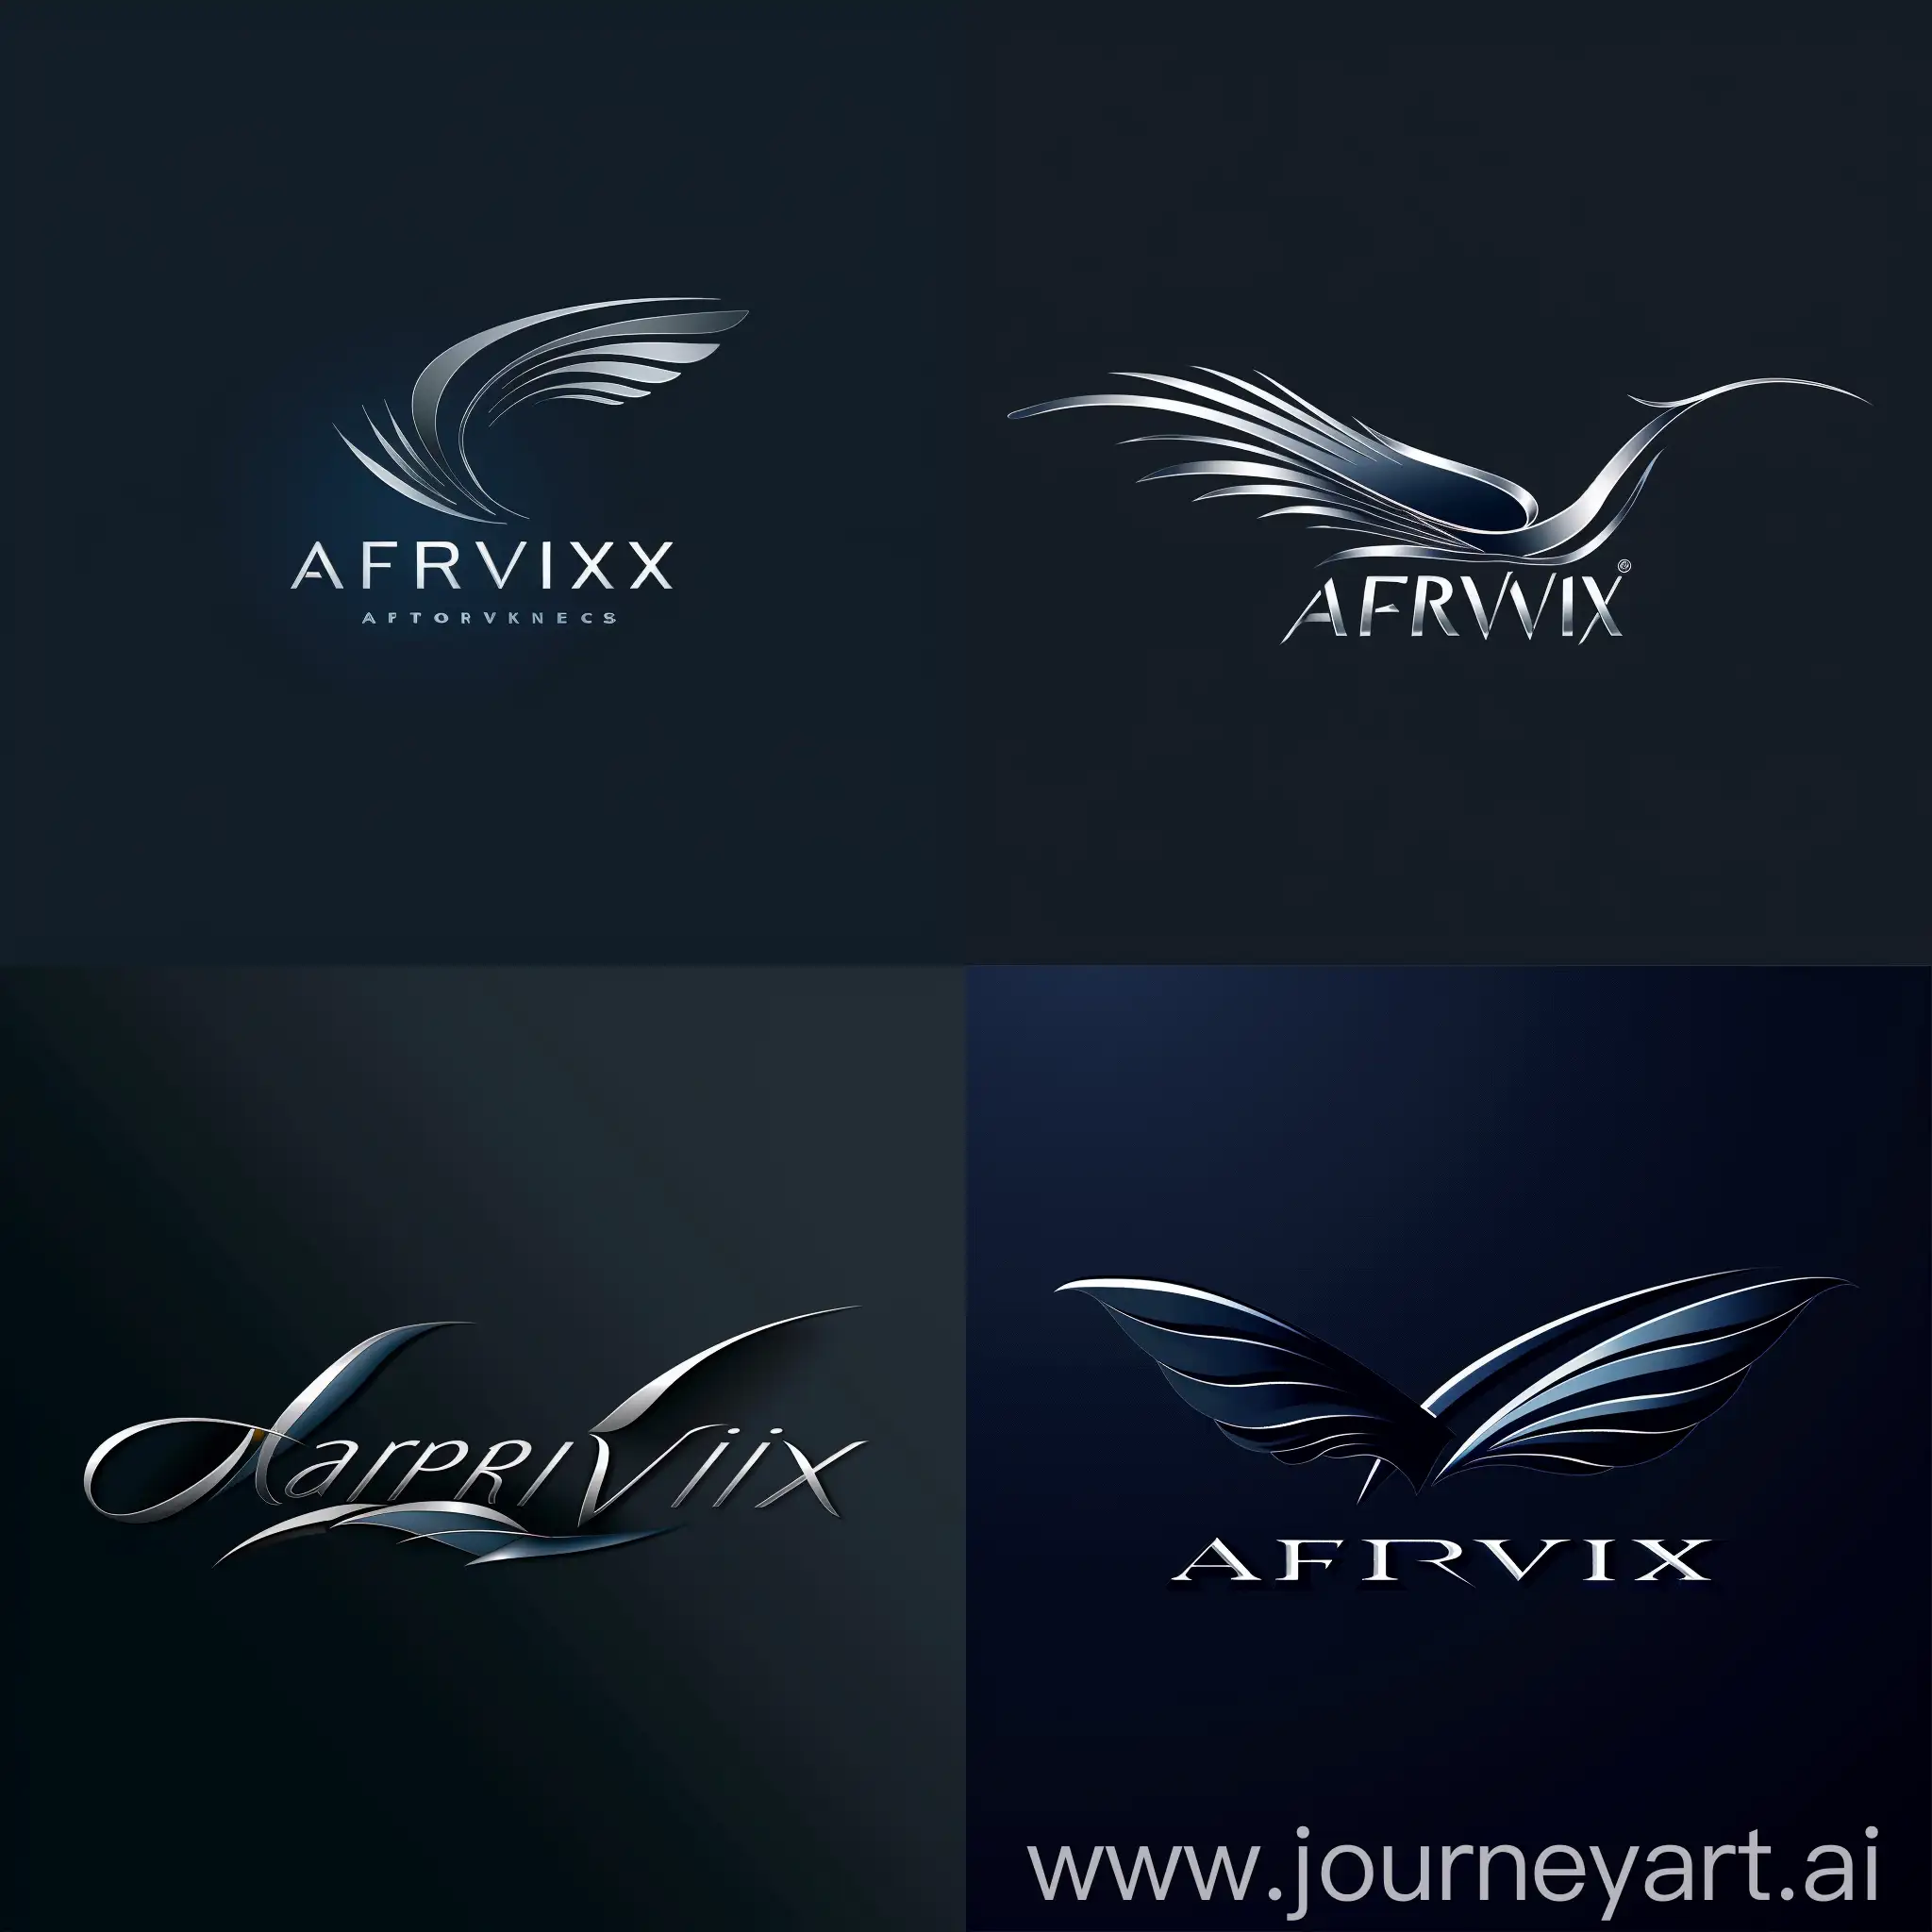 Design a sleek and dynamic logo for AeroVix, an airline that embodies elegance, innovation, and speed. Incorporate a unique symbol representing flight, such as a stylized wing or soaring bird. Choose a clean, modern font for the company name, conveying professionalism and trustworthiness. Use a color palette of dark blue for trust and stability, along with silver accents for sophistication. Keep the design minimalist, visually balanced, and versatile across different mediums. Ensure the logo reflects AeroVix's brand identity and resonates with the target audience. Seek professional feedback to capture AeroVix's essence in the aviation industry.